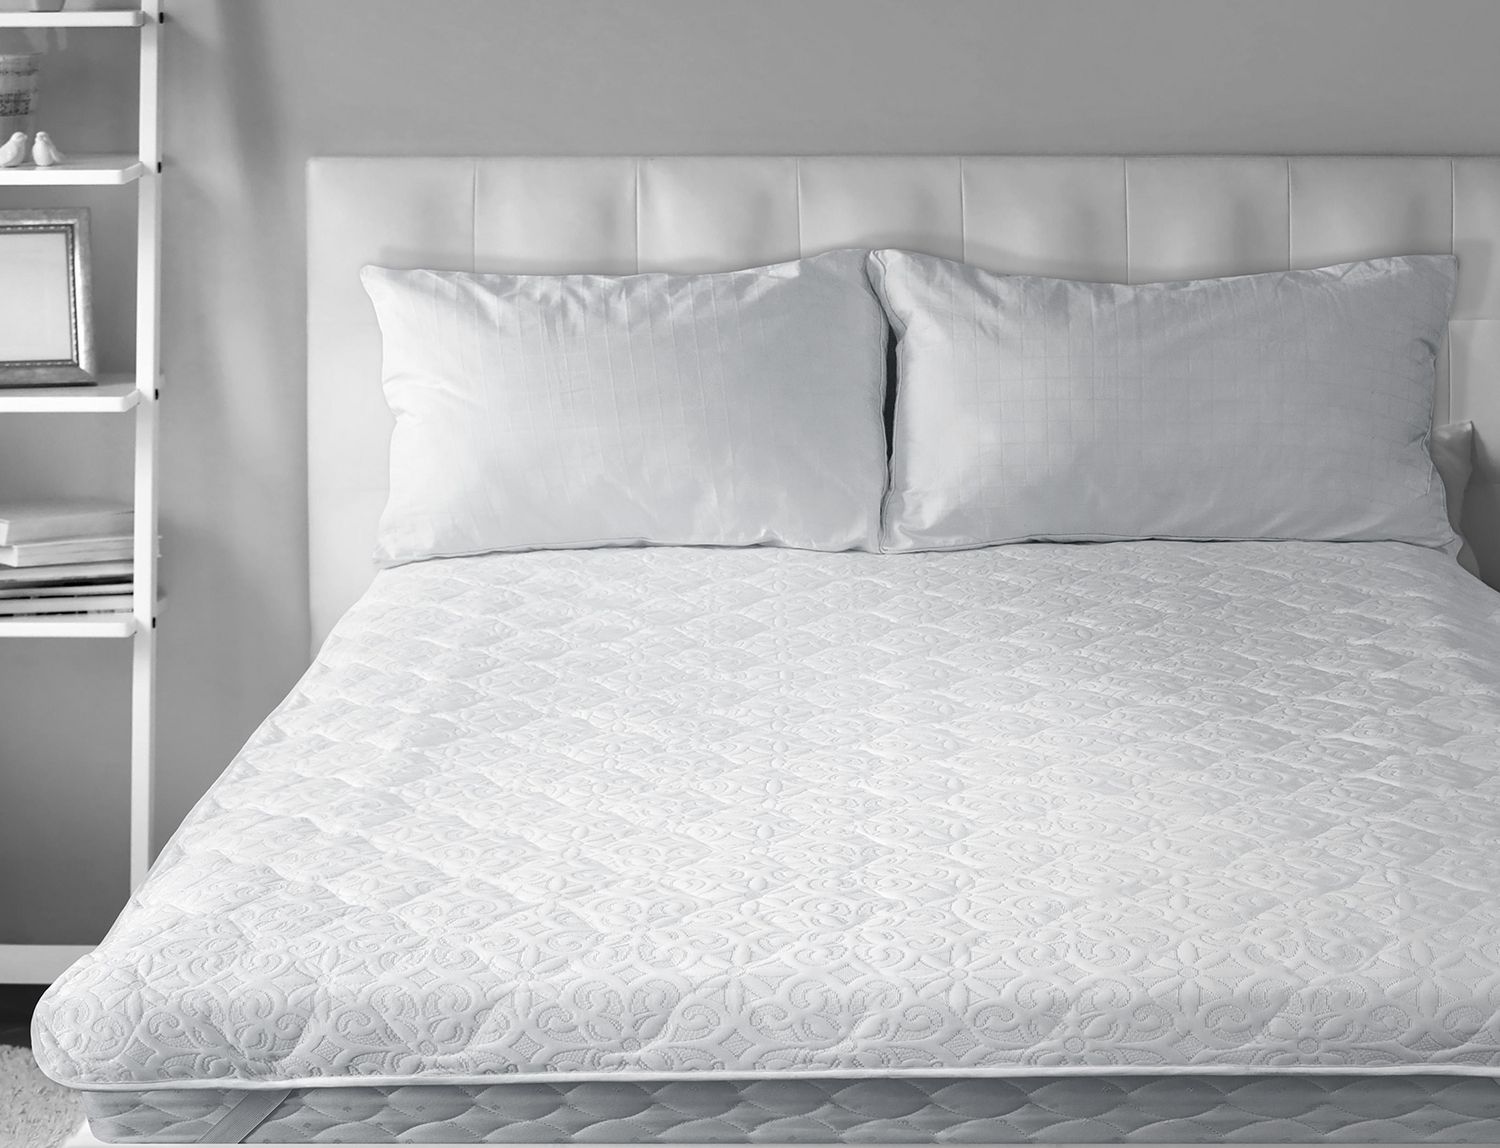 mattress protector with elastic corners